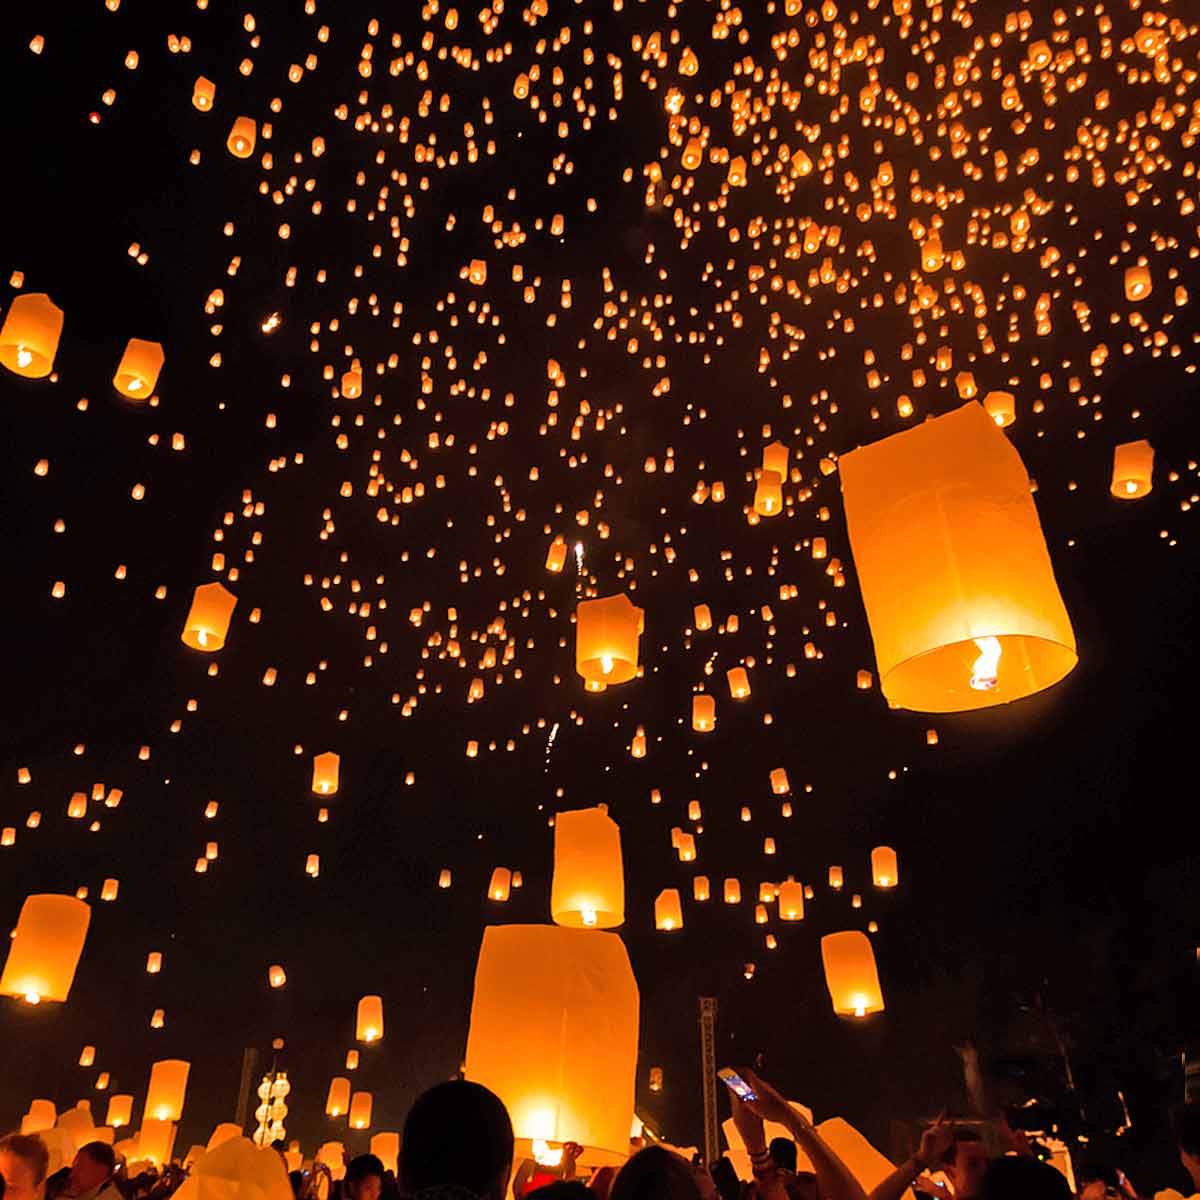 Releasing lanterns into the sky and letting go of negative things.